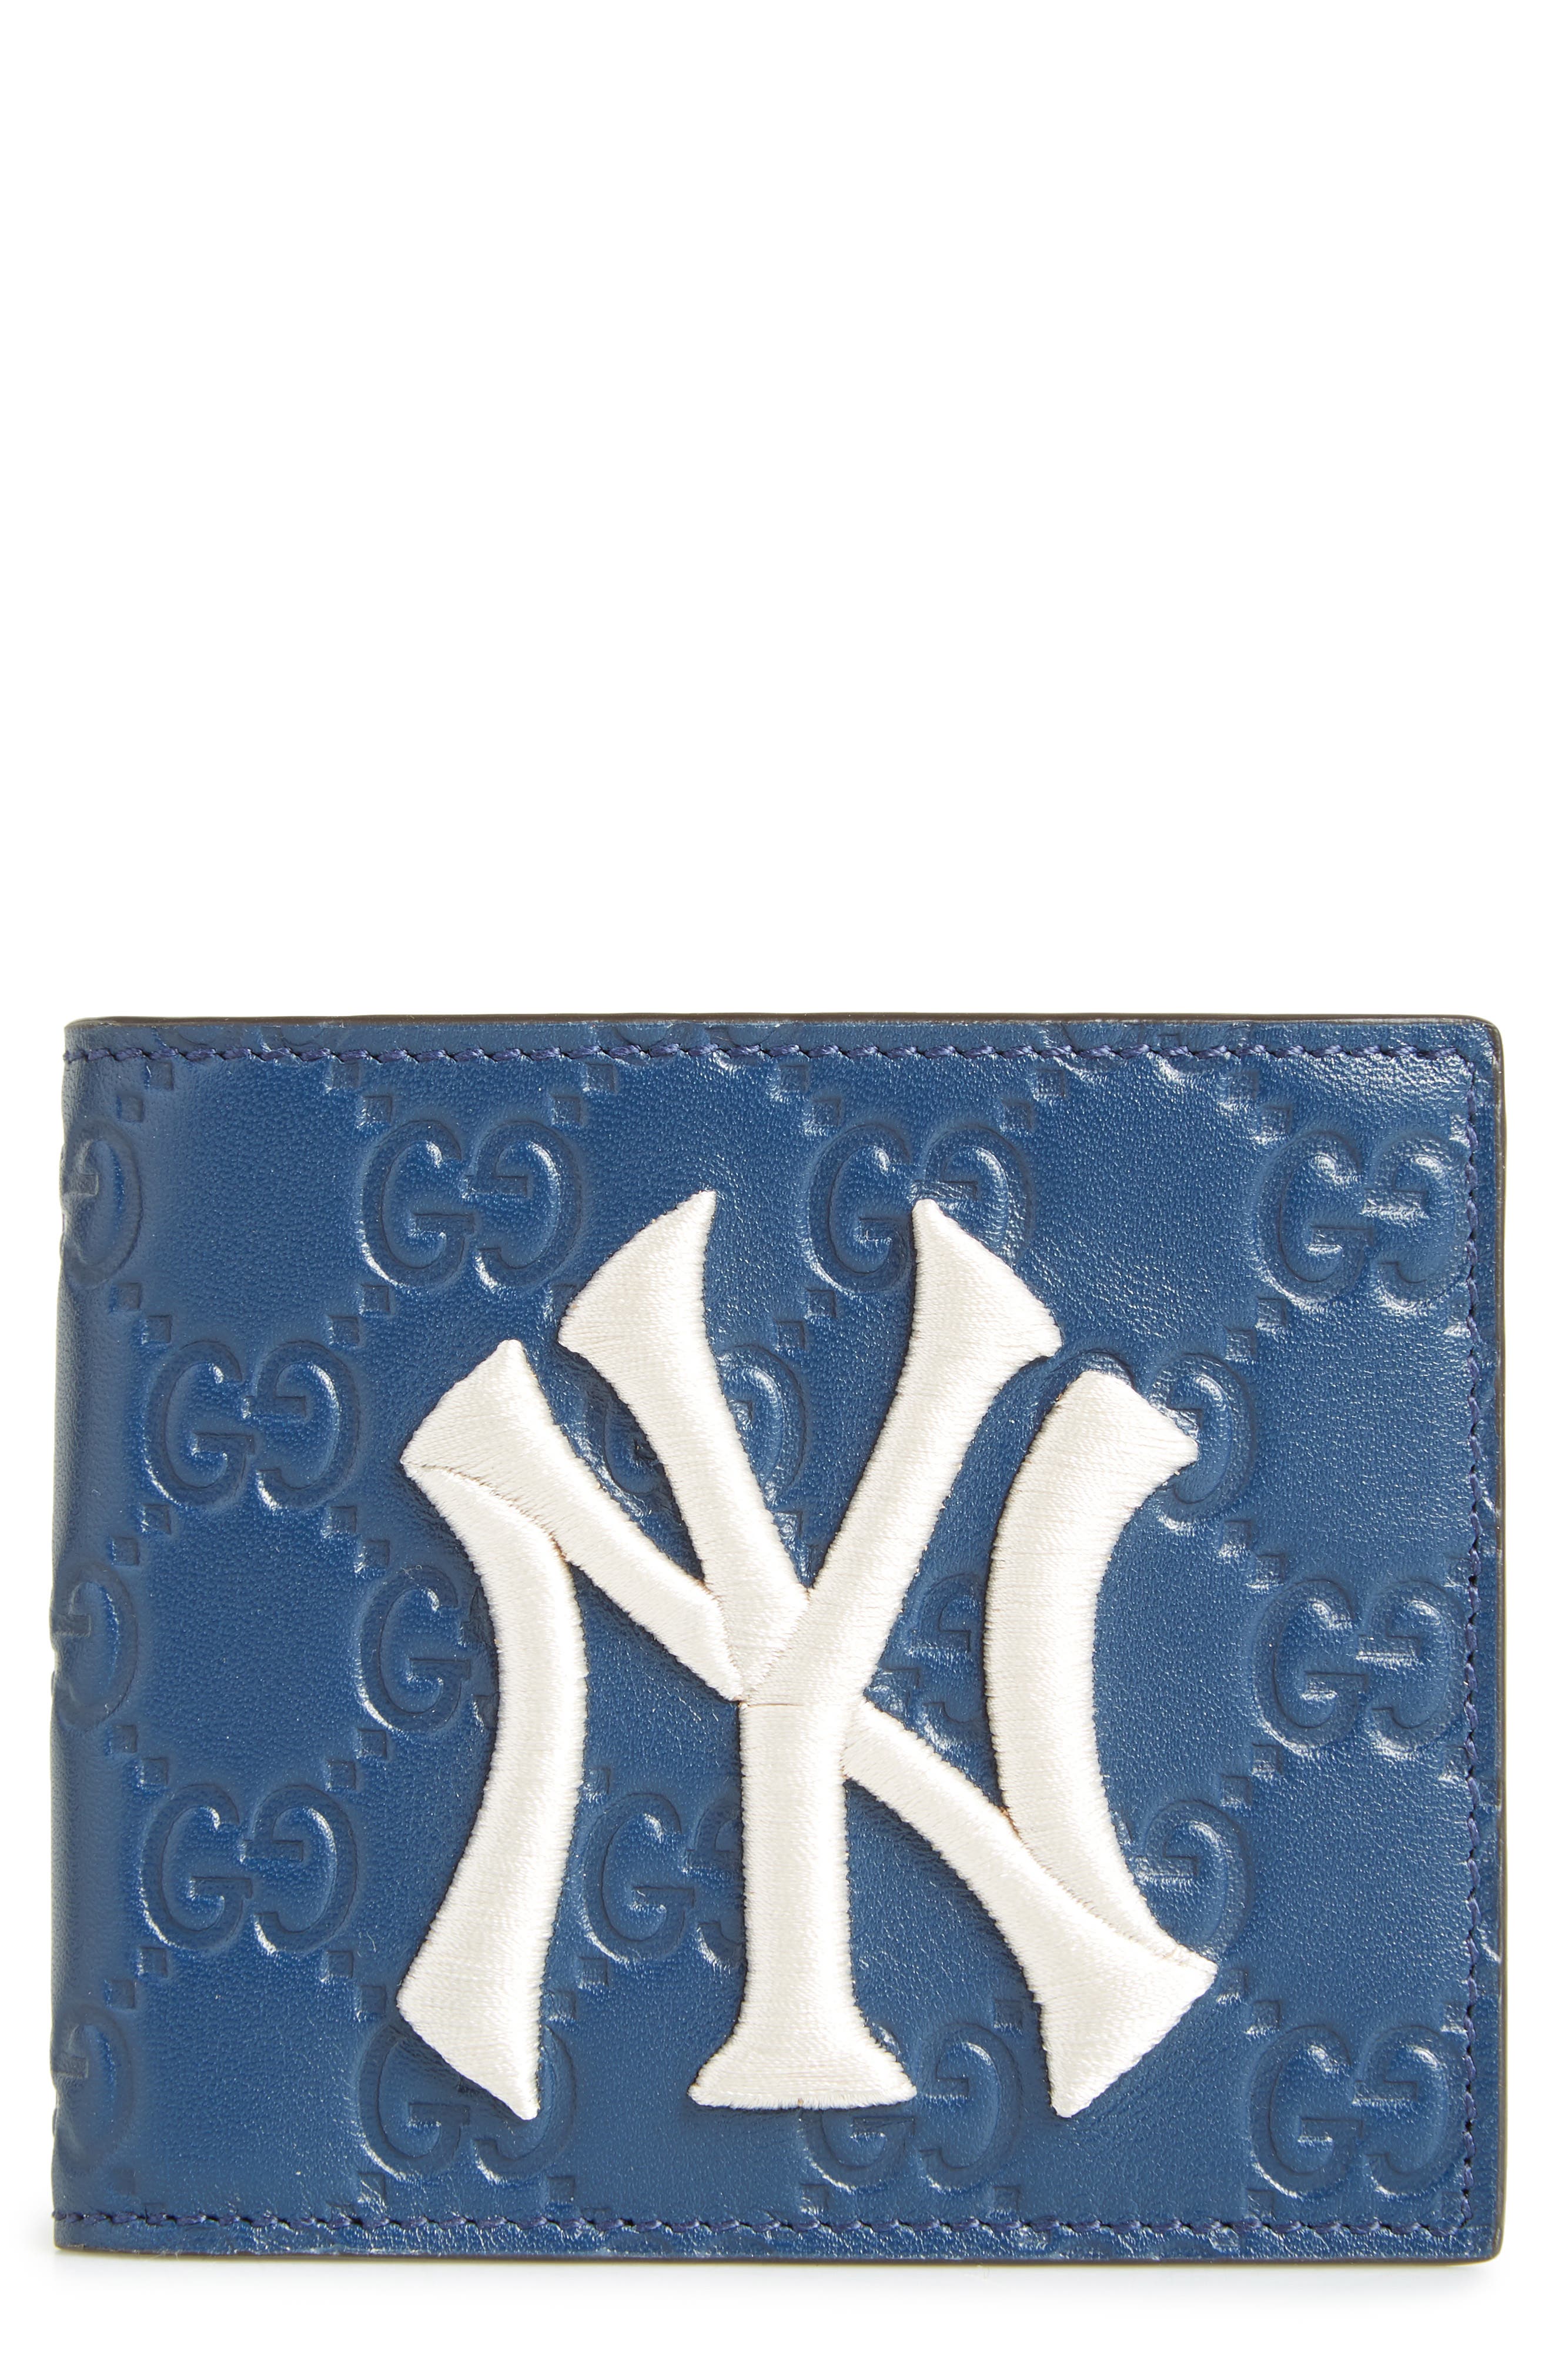 Gucci New York Yankees Leather Wallet 